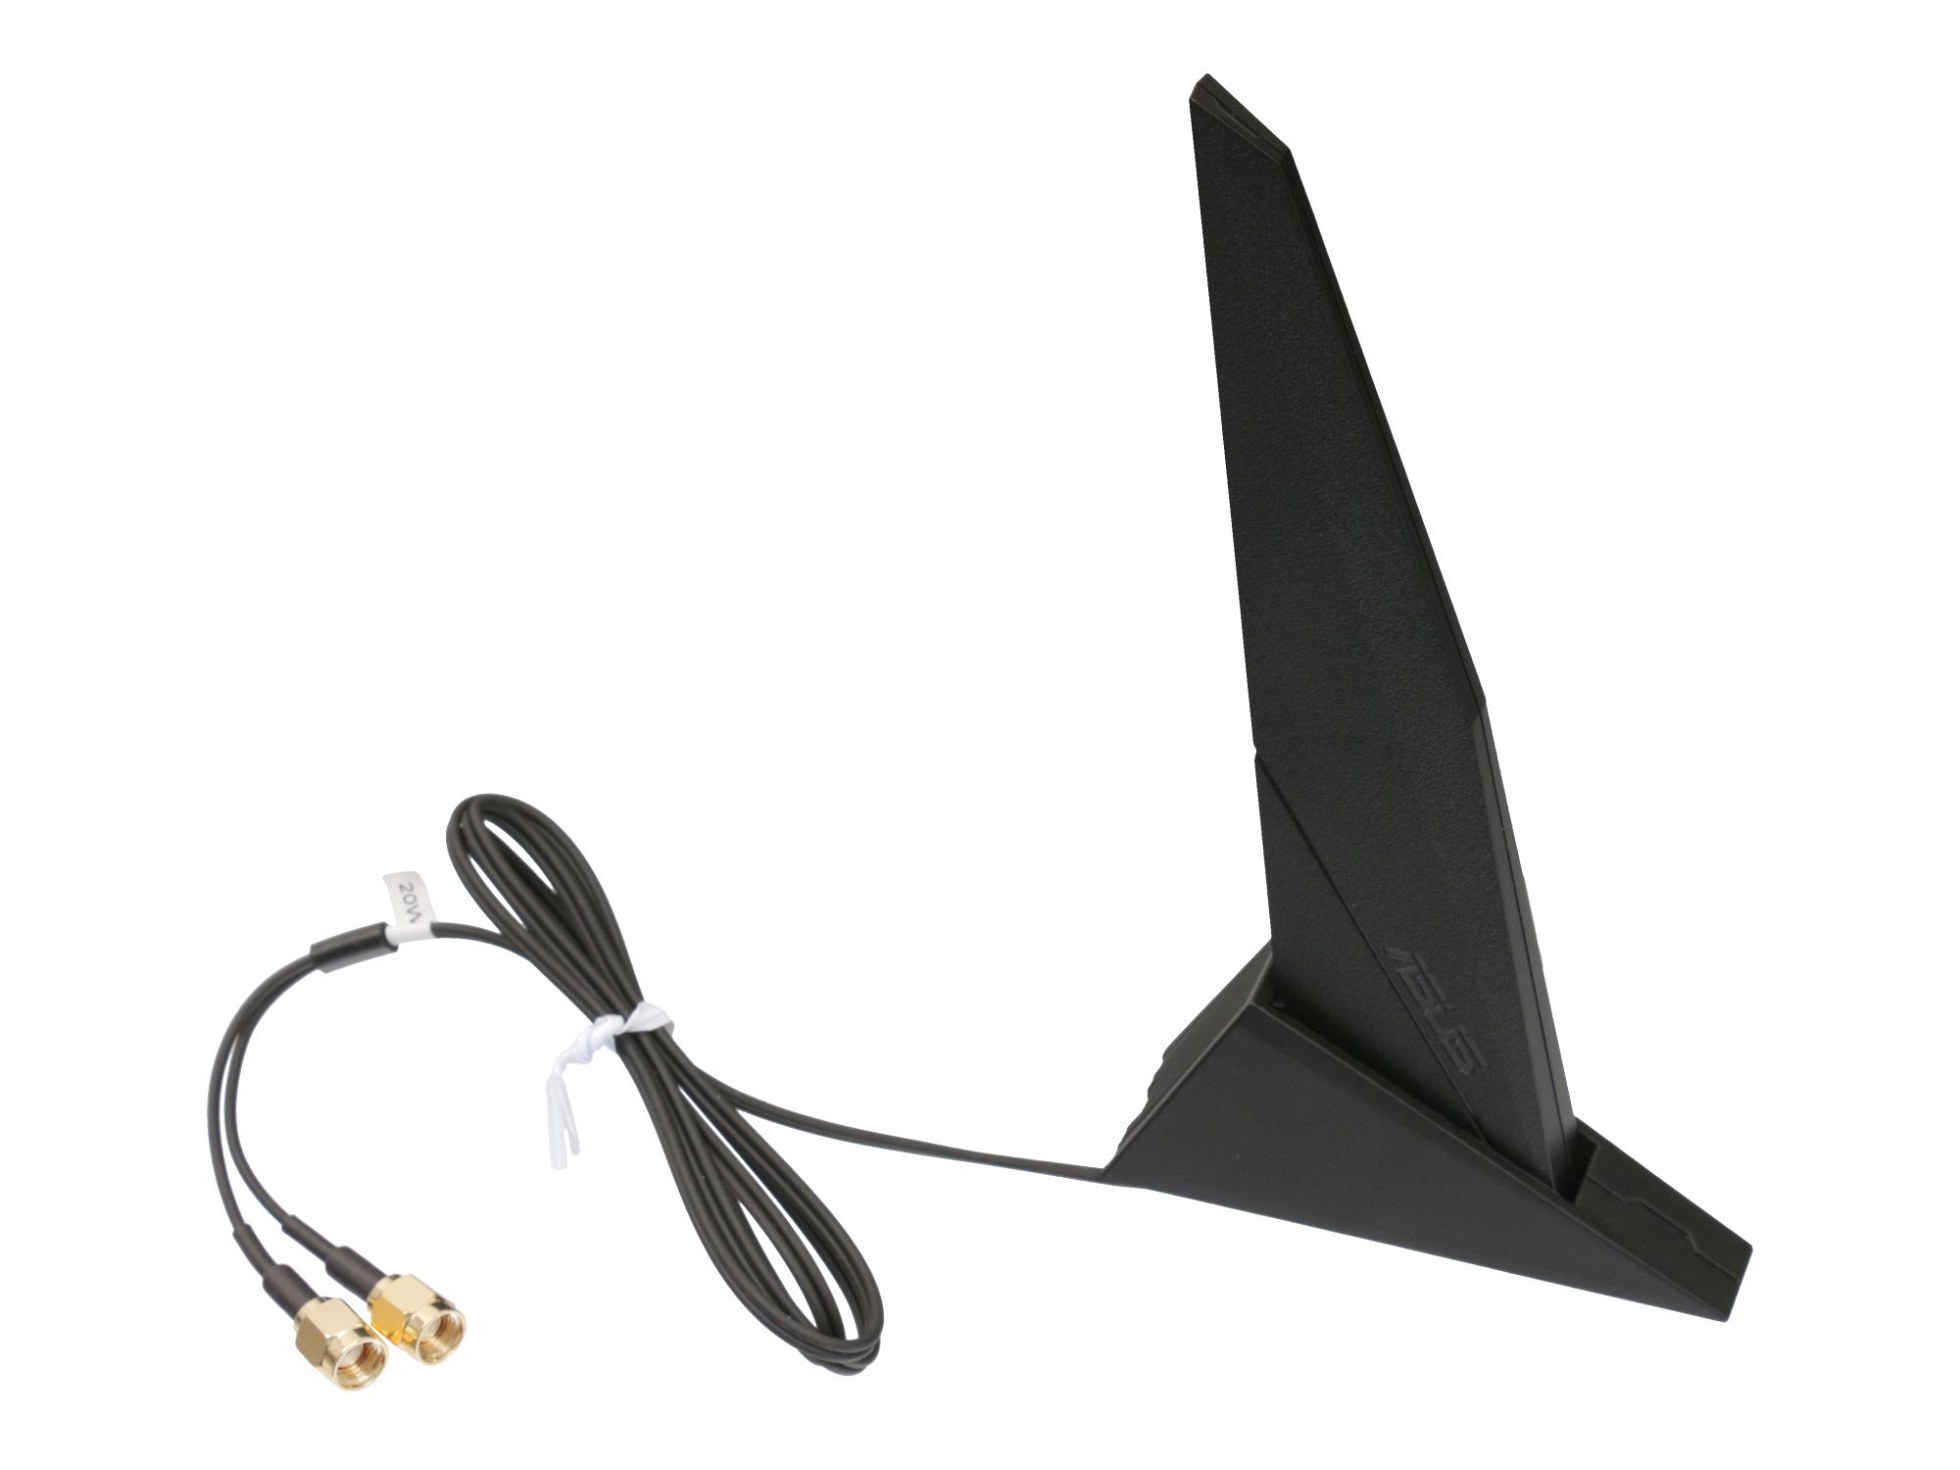 Externe Asus RP-SMA DIPOLE Antenne für Asus TUF Gaming B550M-E WIFI